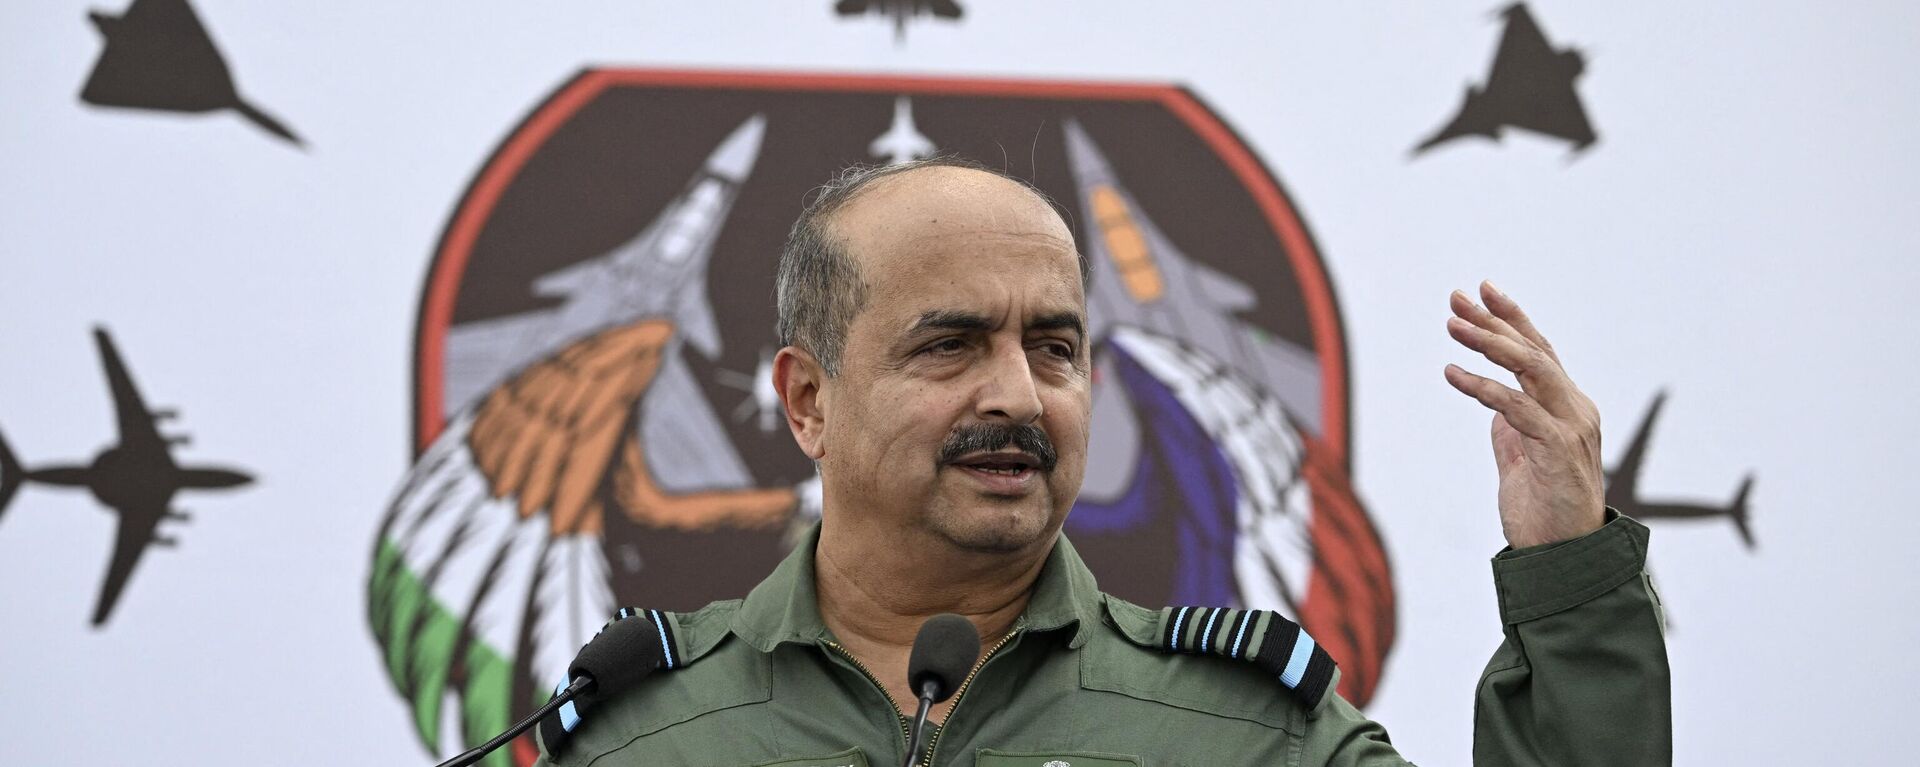 India's Chief of the Air Staff, Vivek Ram Chaudhari addresses a press conference during the joint exercise 'Ex Garuda-VII' between Indian Air Force (IAF) and French Air and Space Force (FASF) at Jodhpur in India's desert state of Rajasthan on November 8, 2022. - Sputnik India, 1920, 18.04.2023